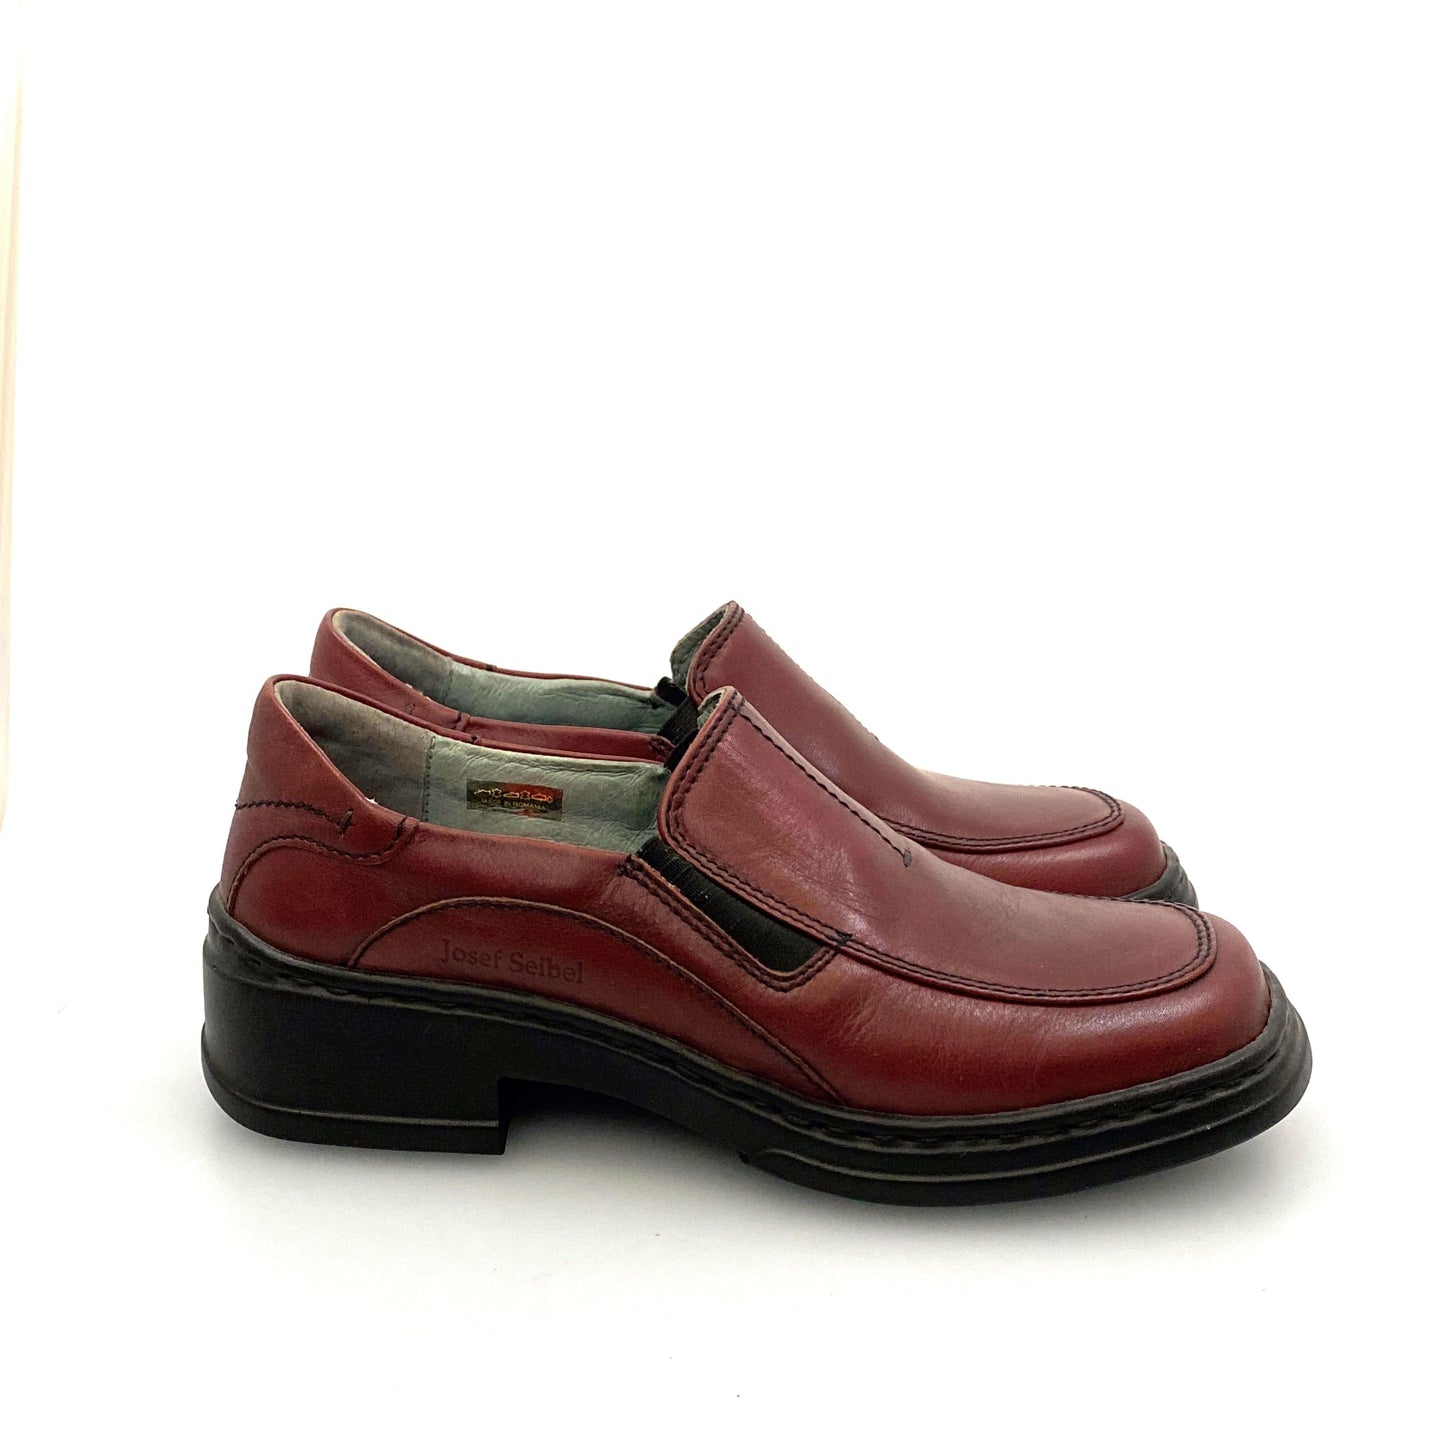 Josef Seibel Womens Size 37 Maroon Red Leather Loafers Shoes